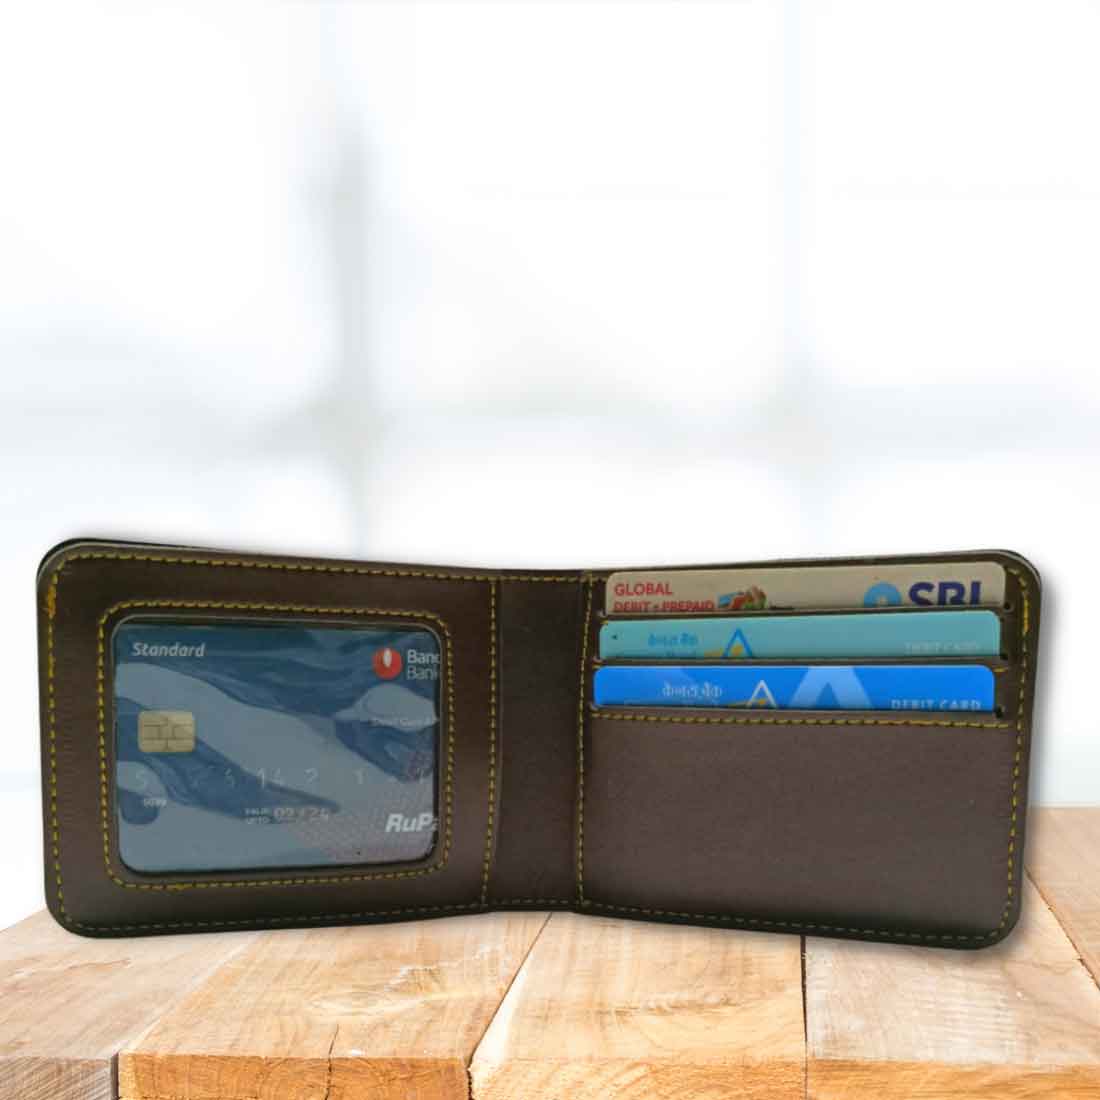 Wallet and keychain gift set for men | Wallet keychain gift combo